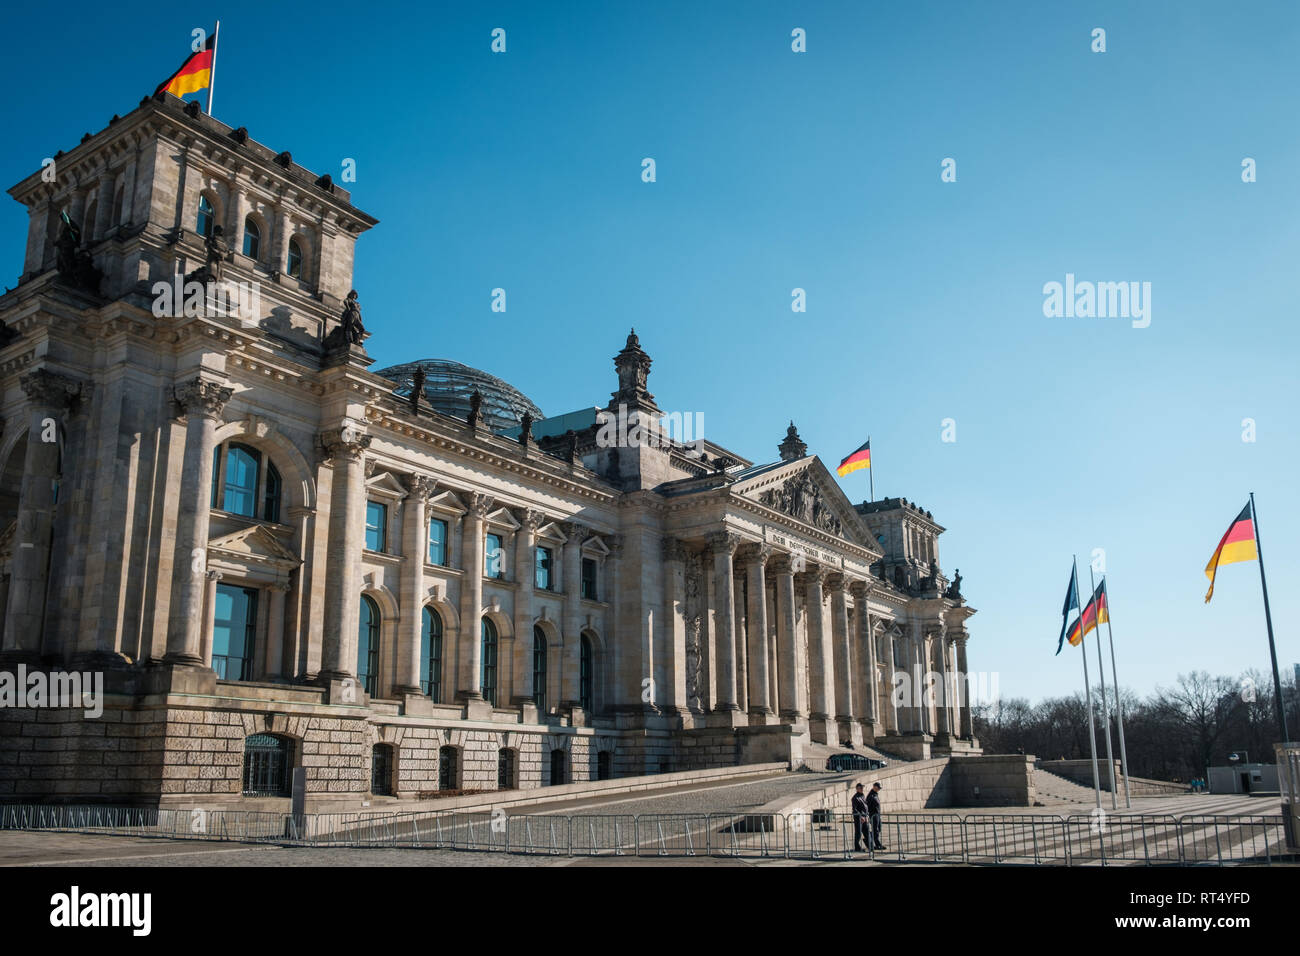 Berlin, Germany - february 2019: The German Reichstag building in Berlin, Germany Stock Photo